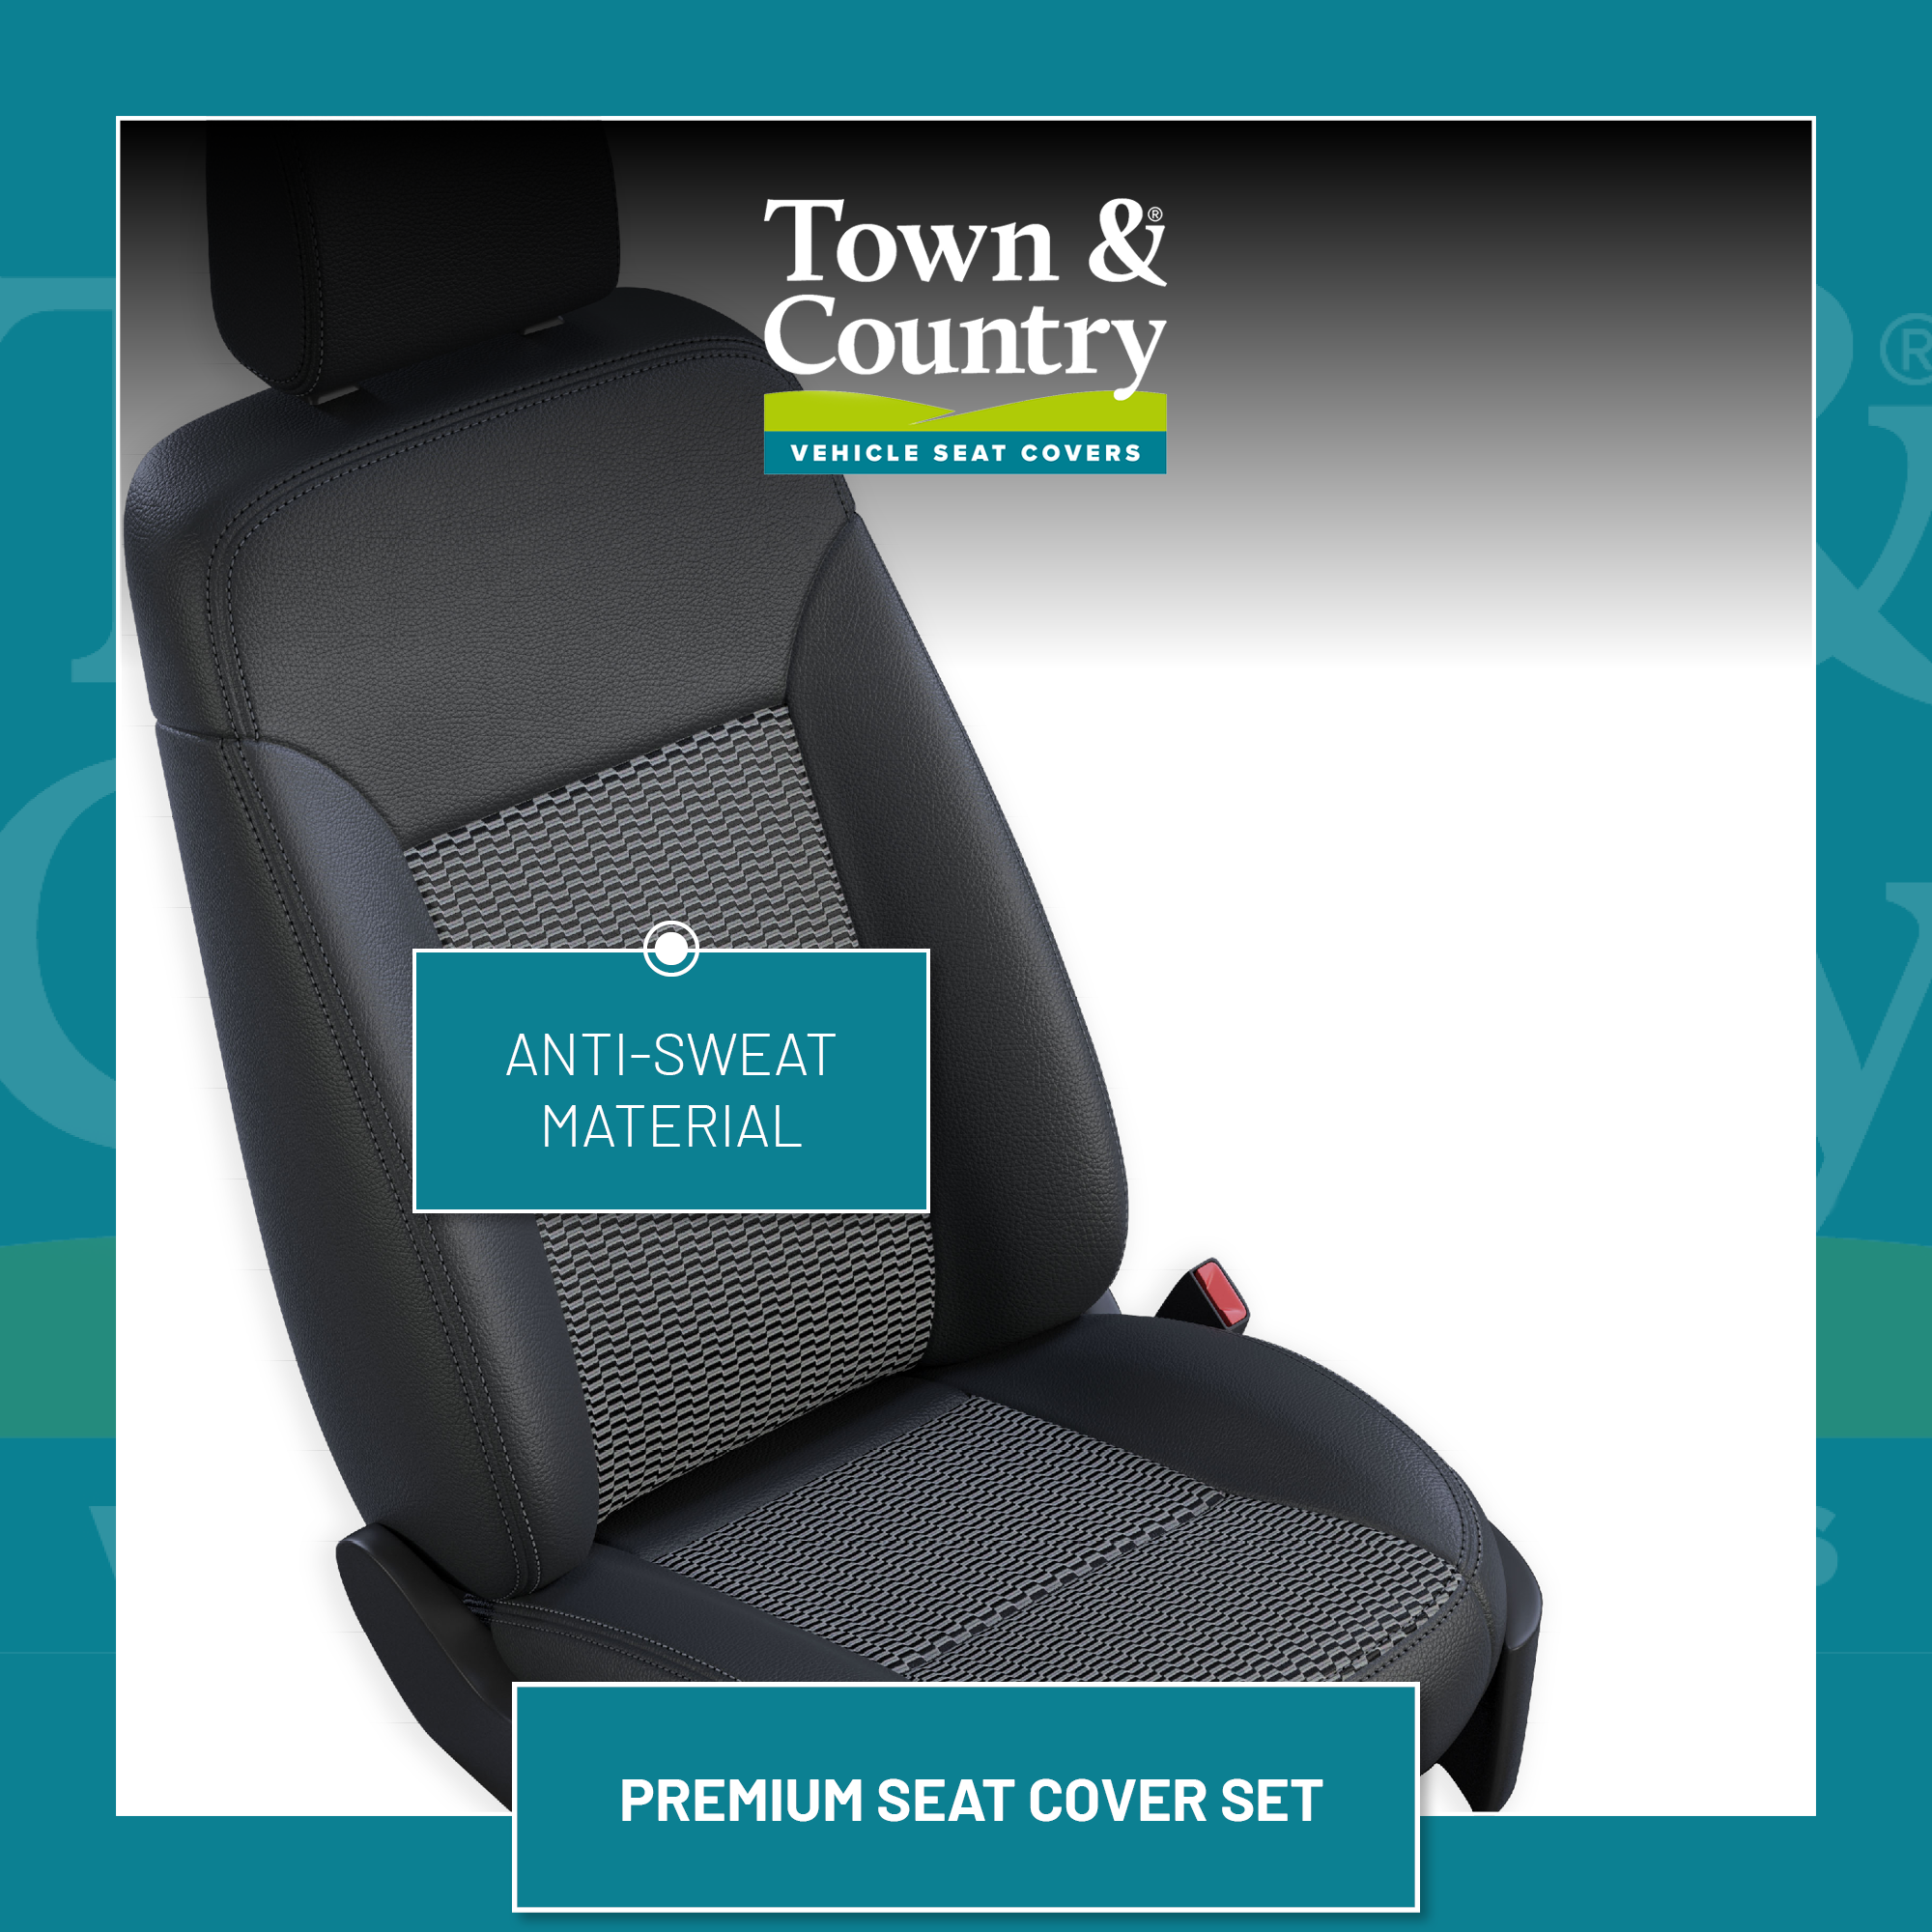 Leatherette MAN Truck Seat Covers